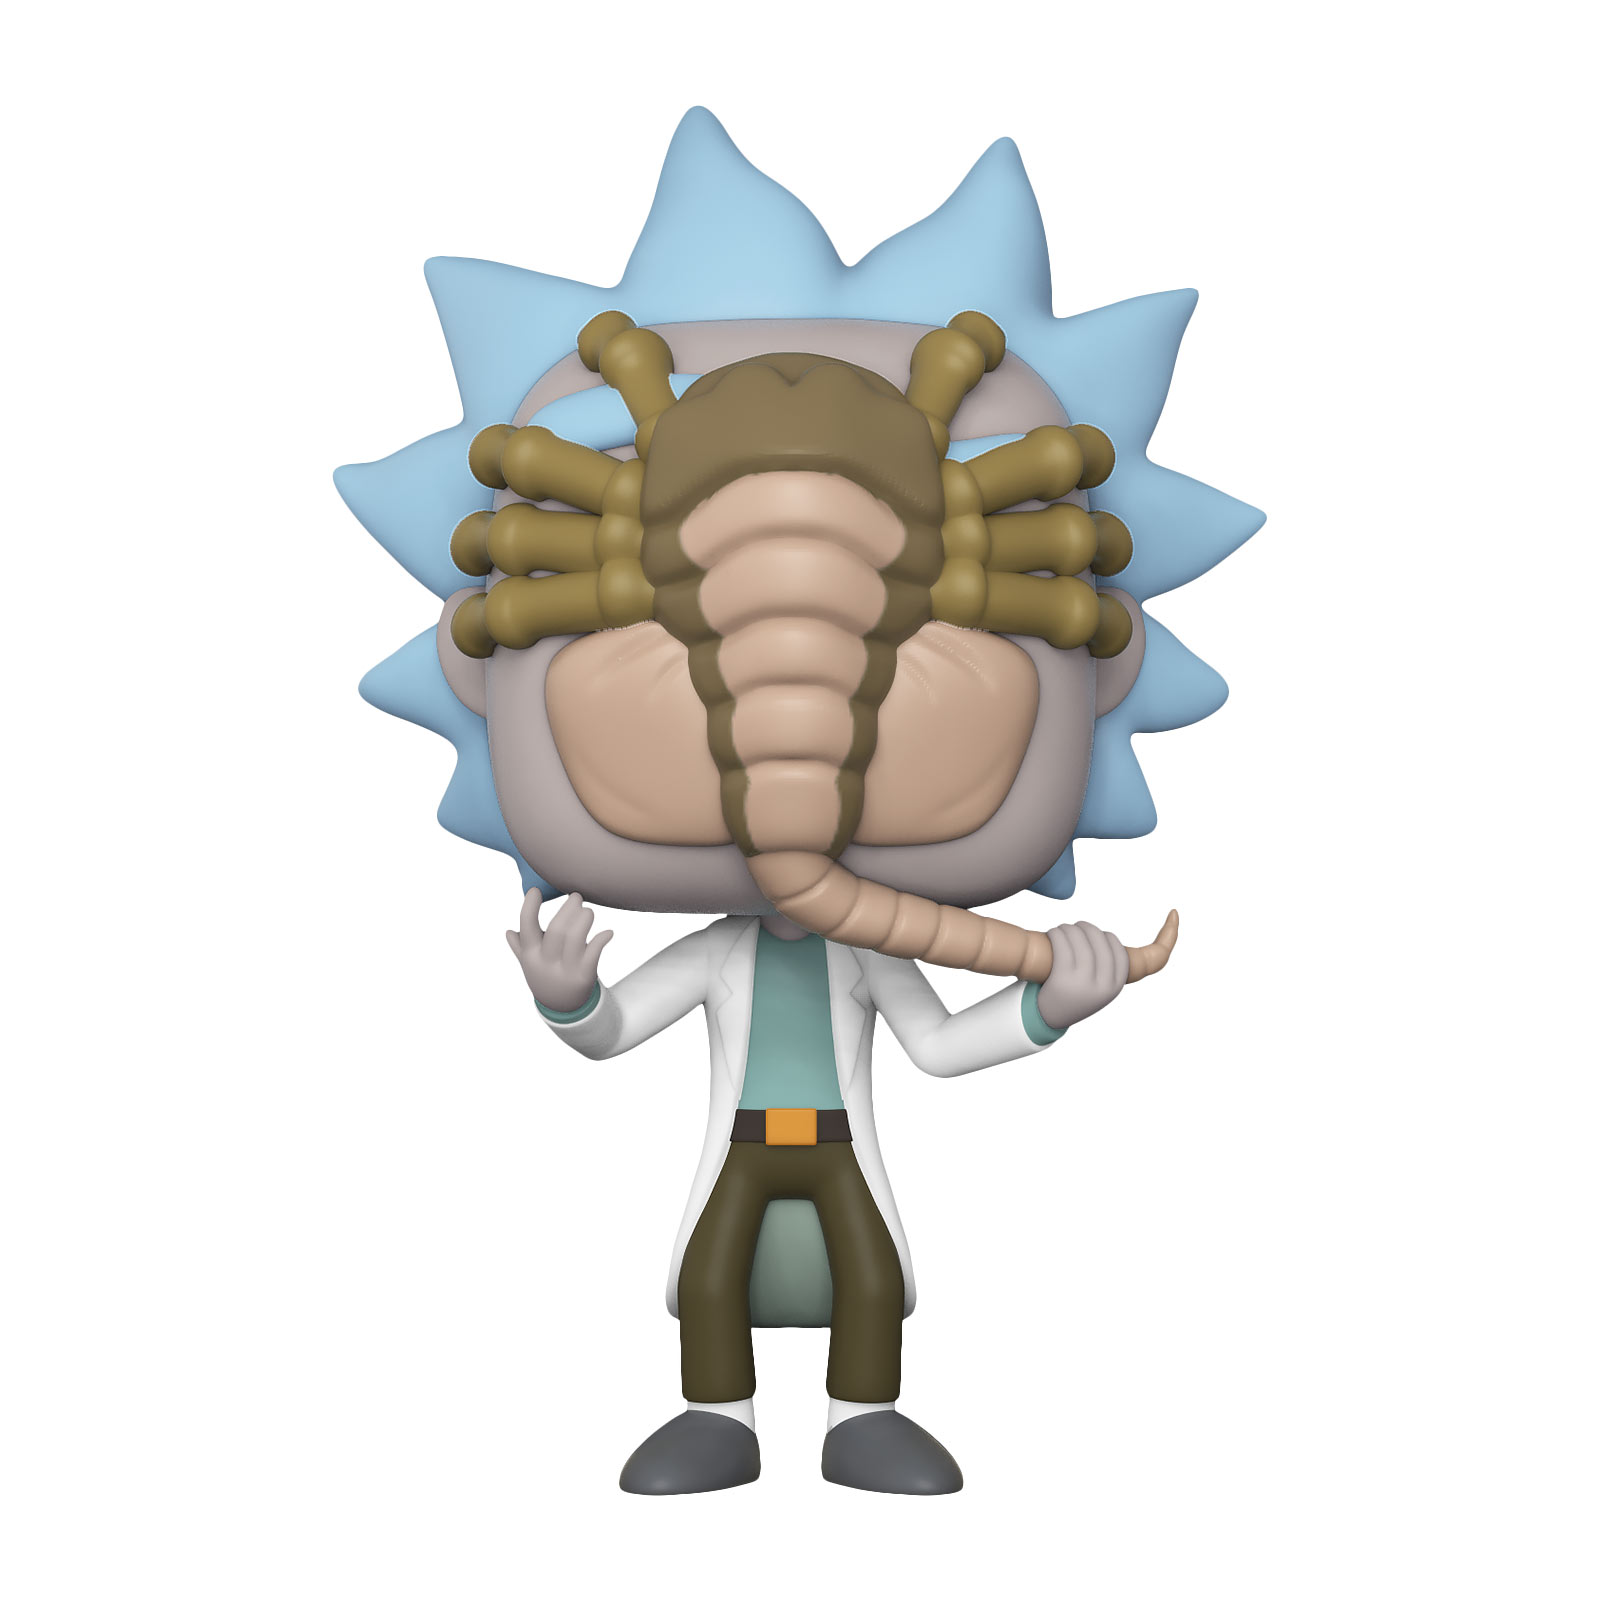 Rick and Morty - Rick Facehugger Funko Pop figure